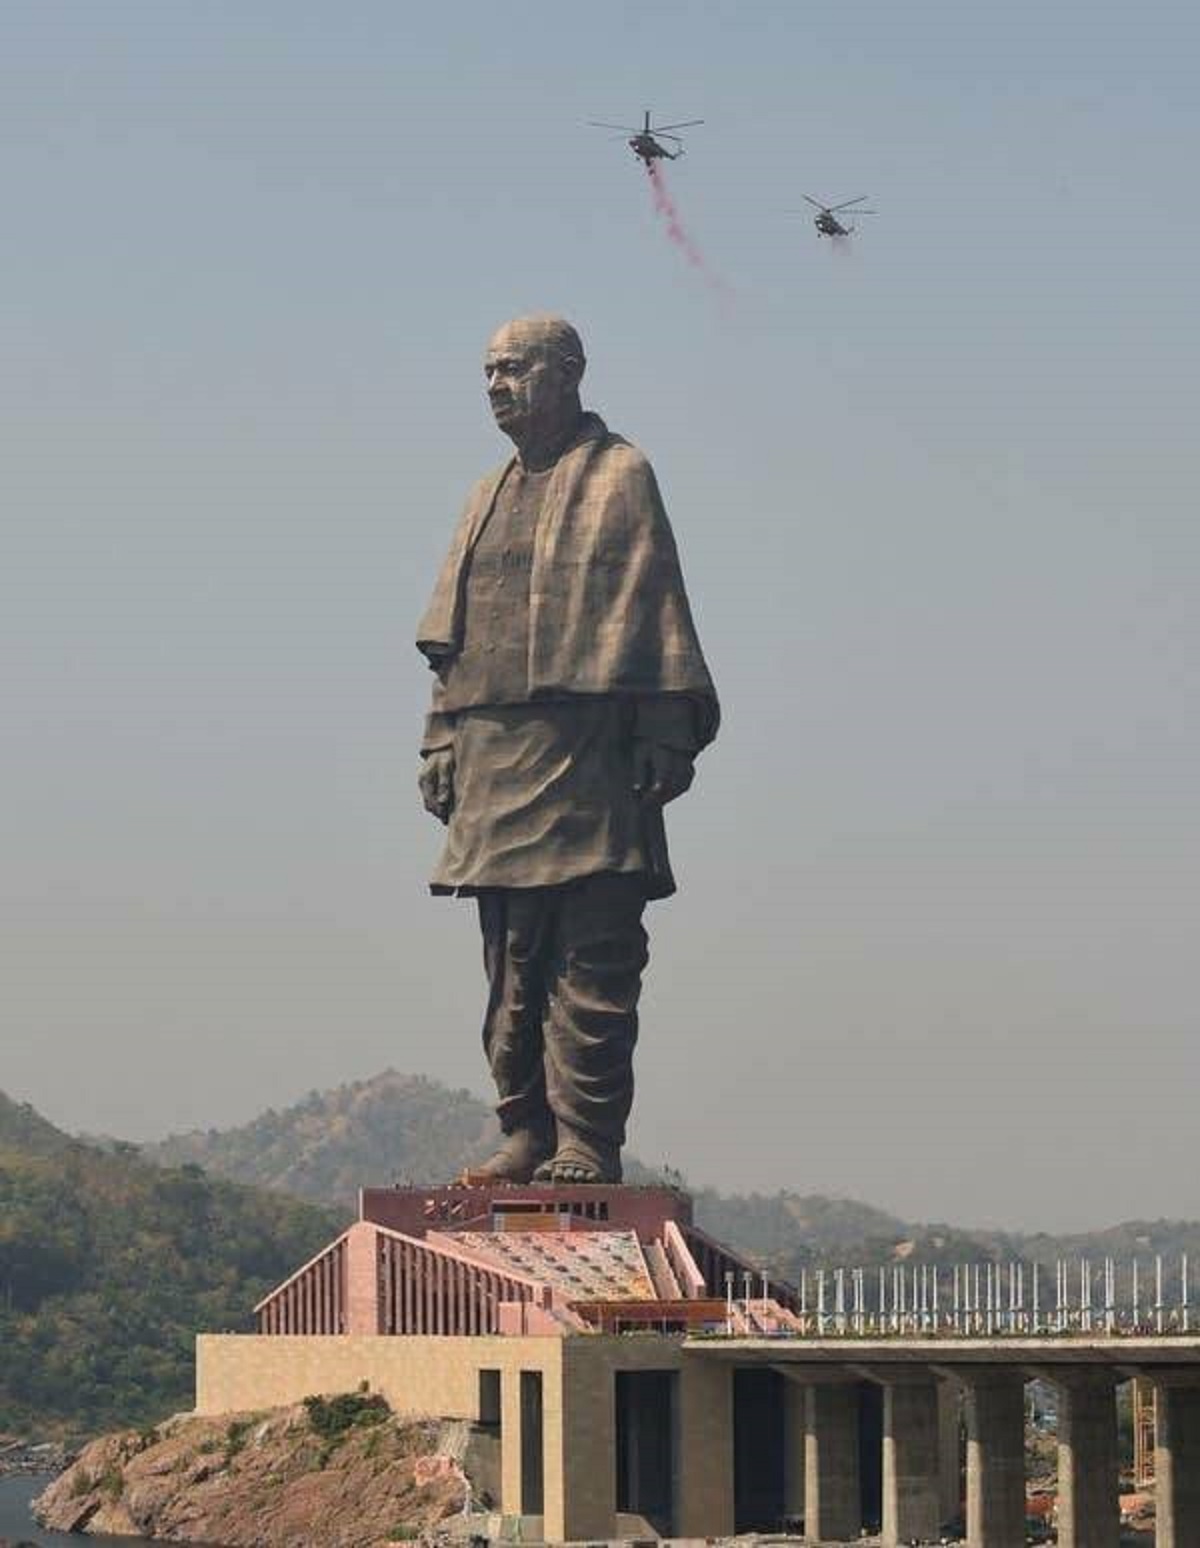 This is the world's tallest statue, the Statue of Unity: